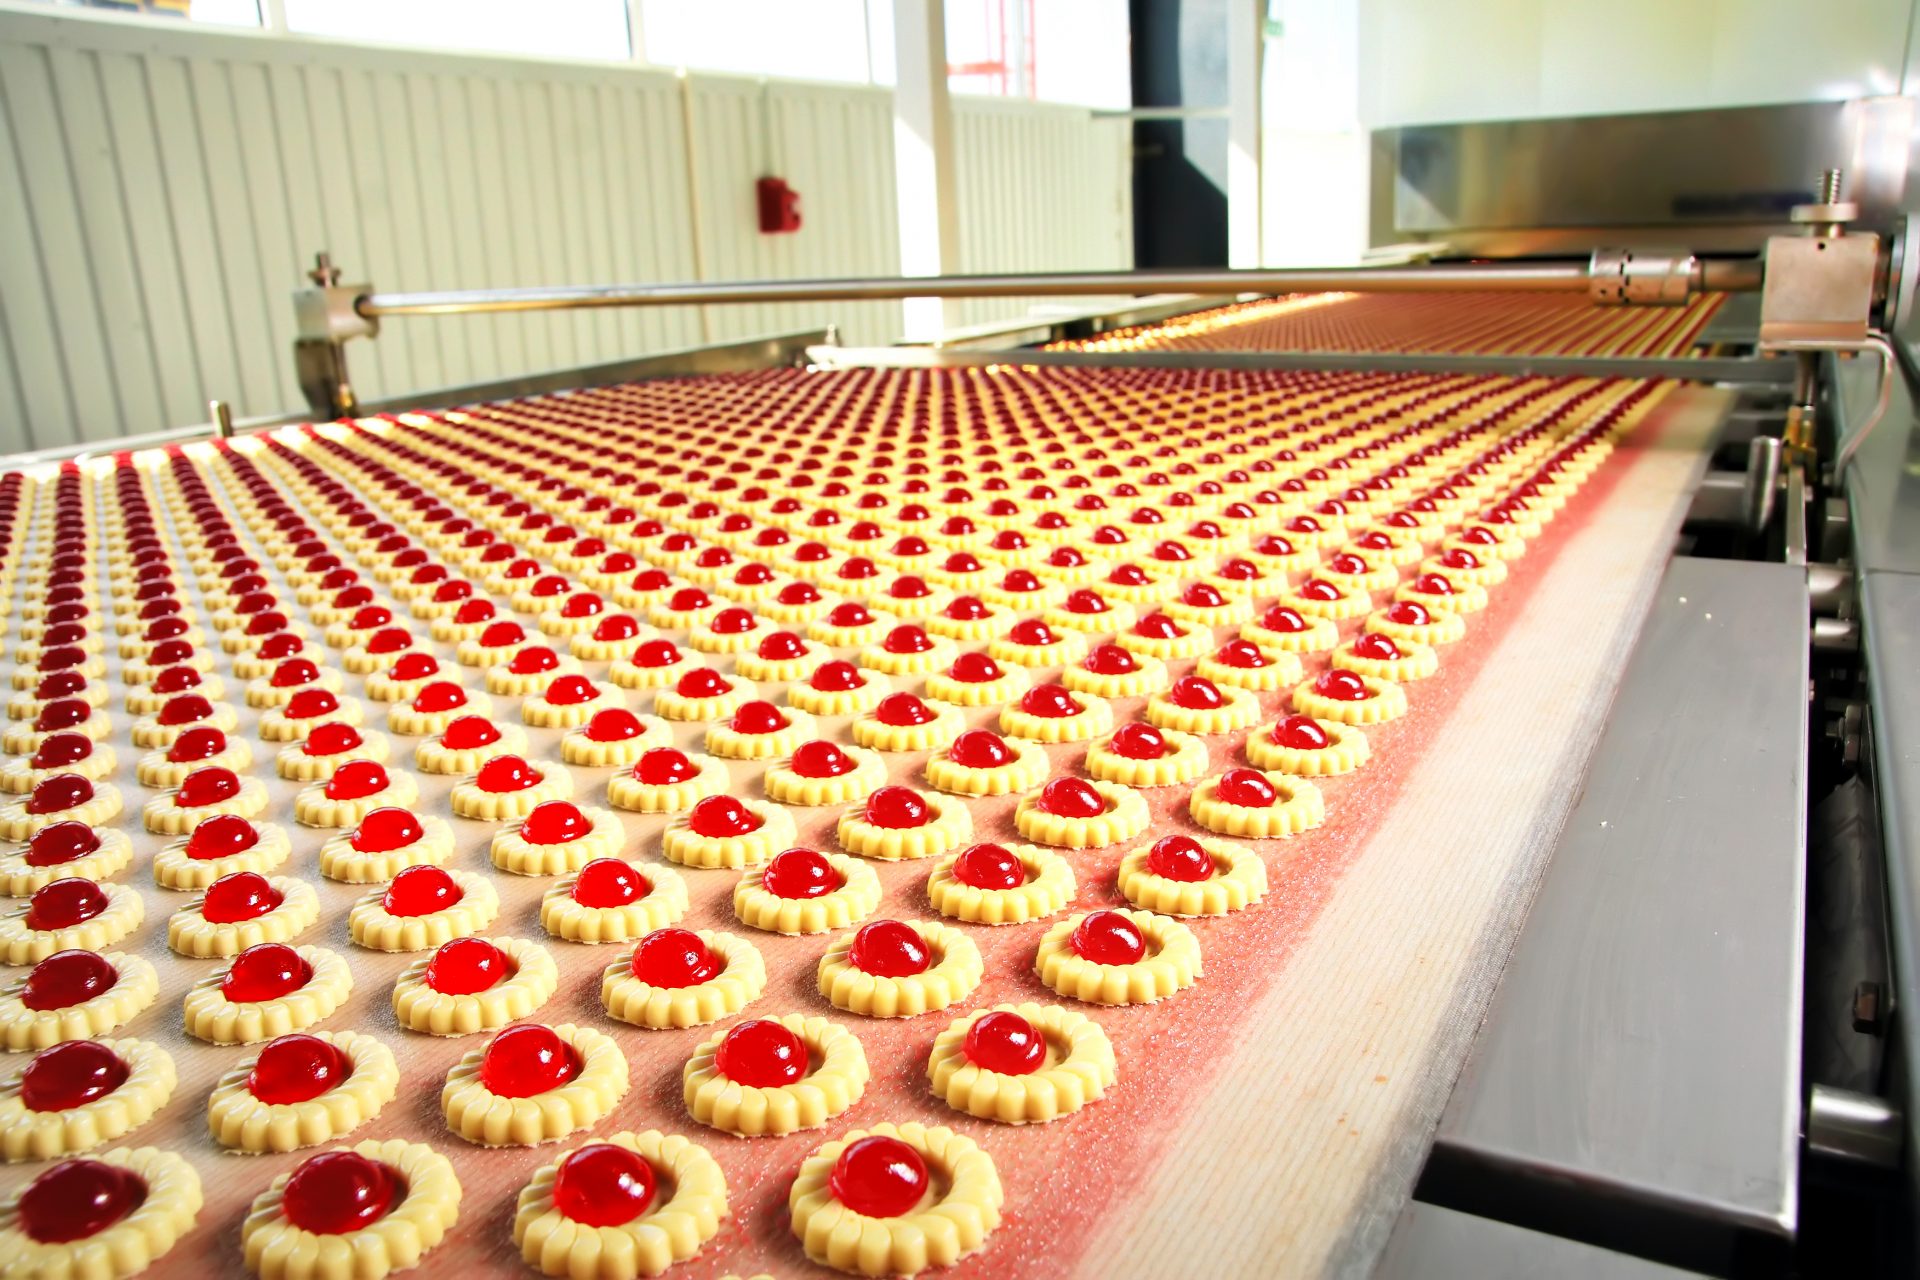 conveyor belt in a manufacturing facility that received food safety certification.